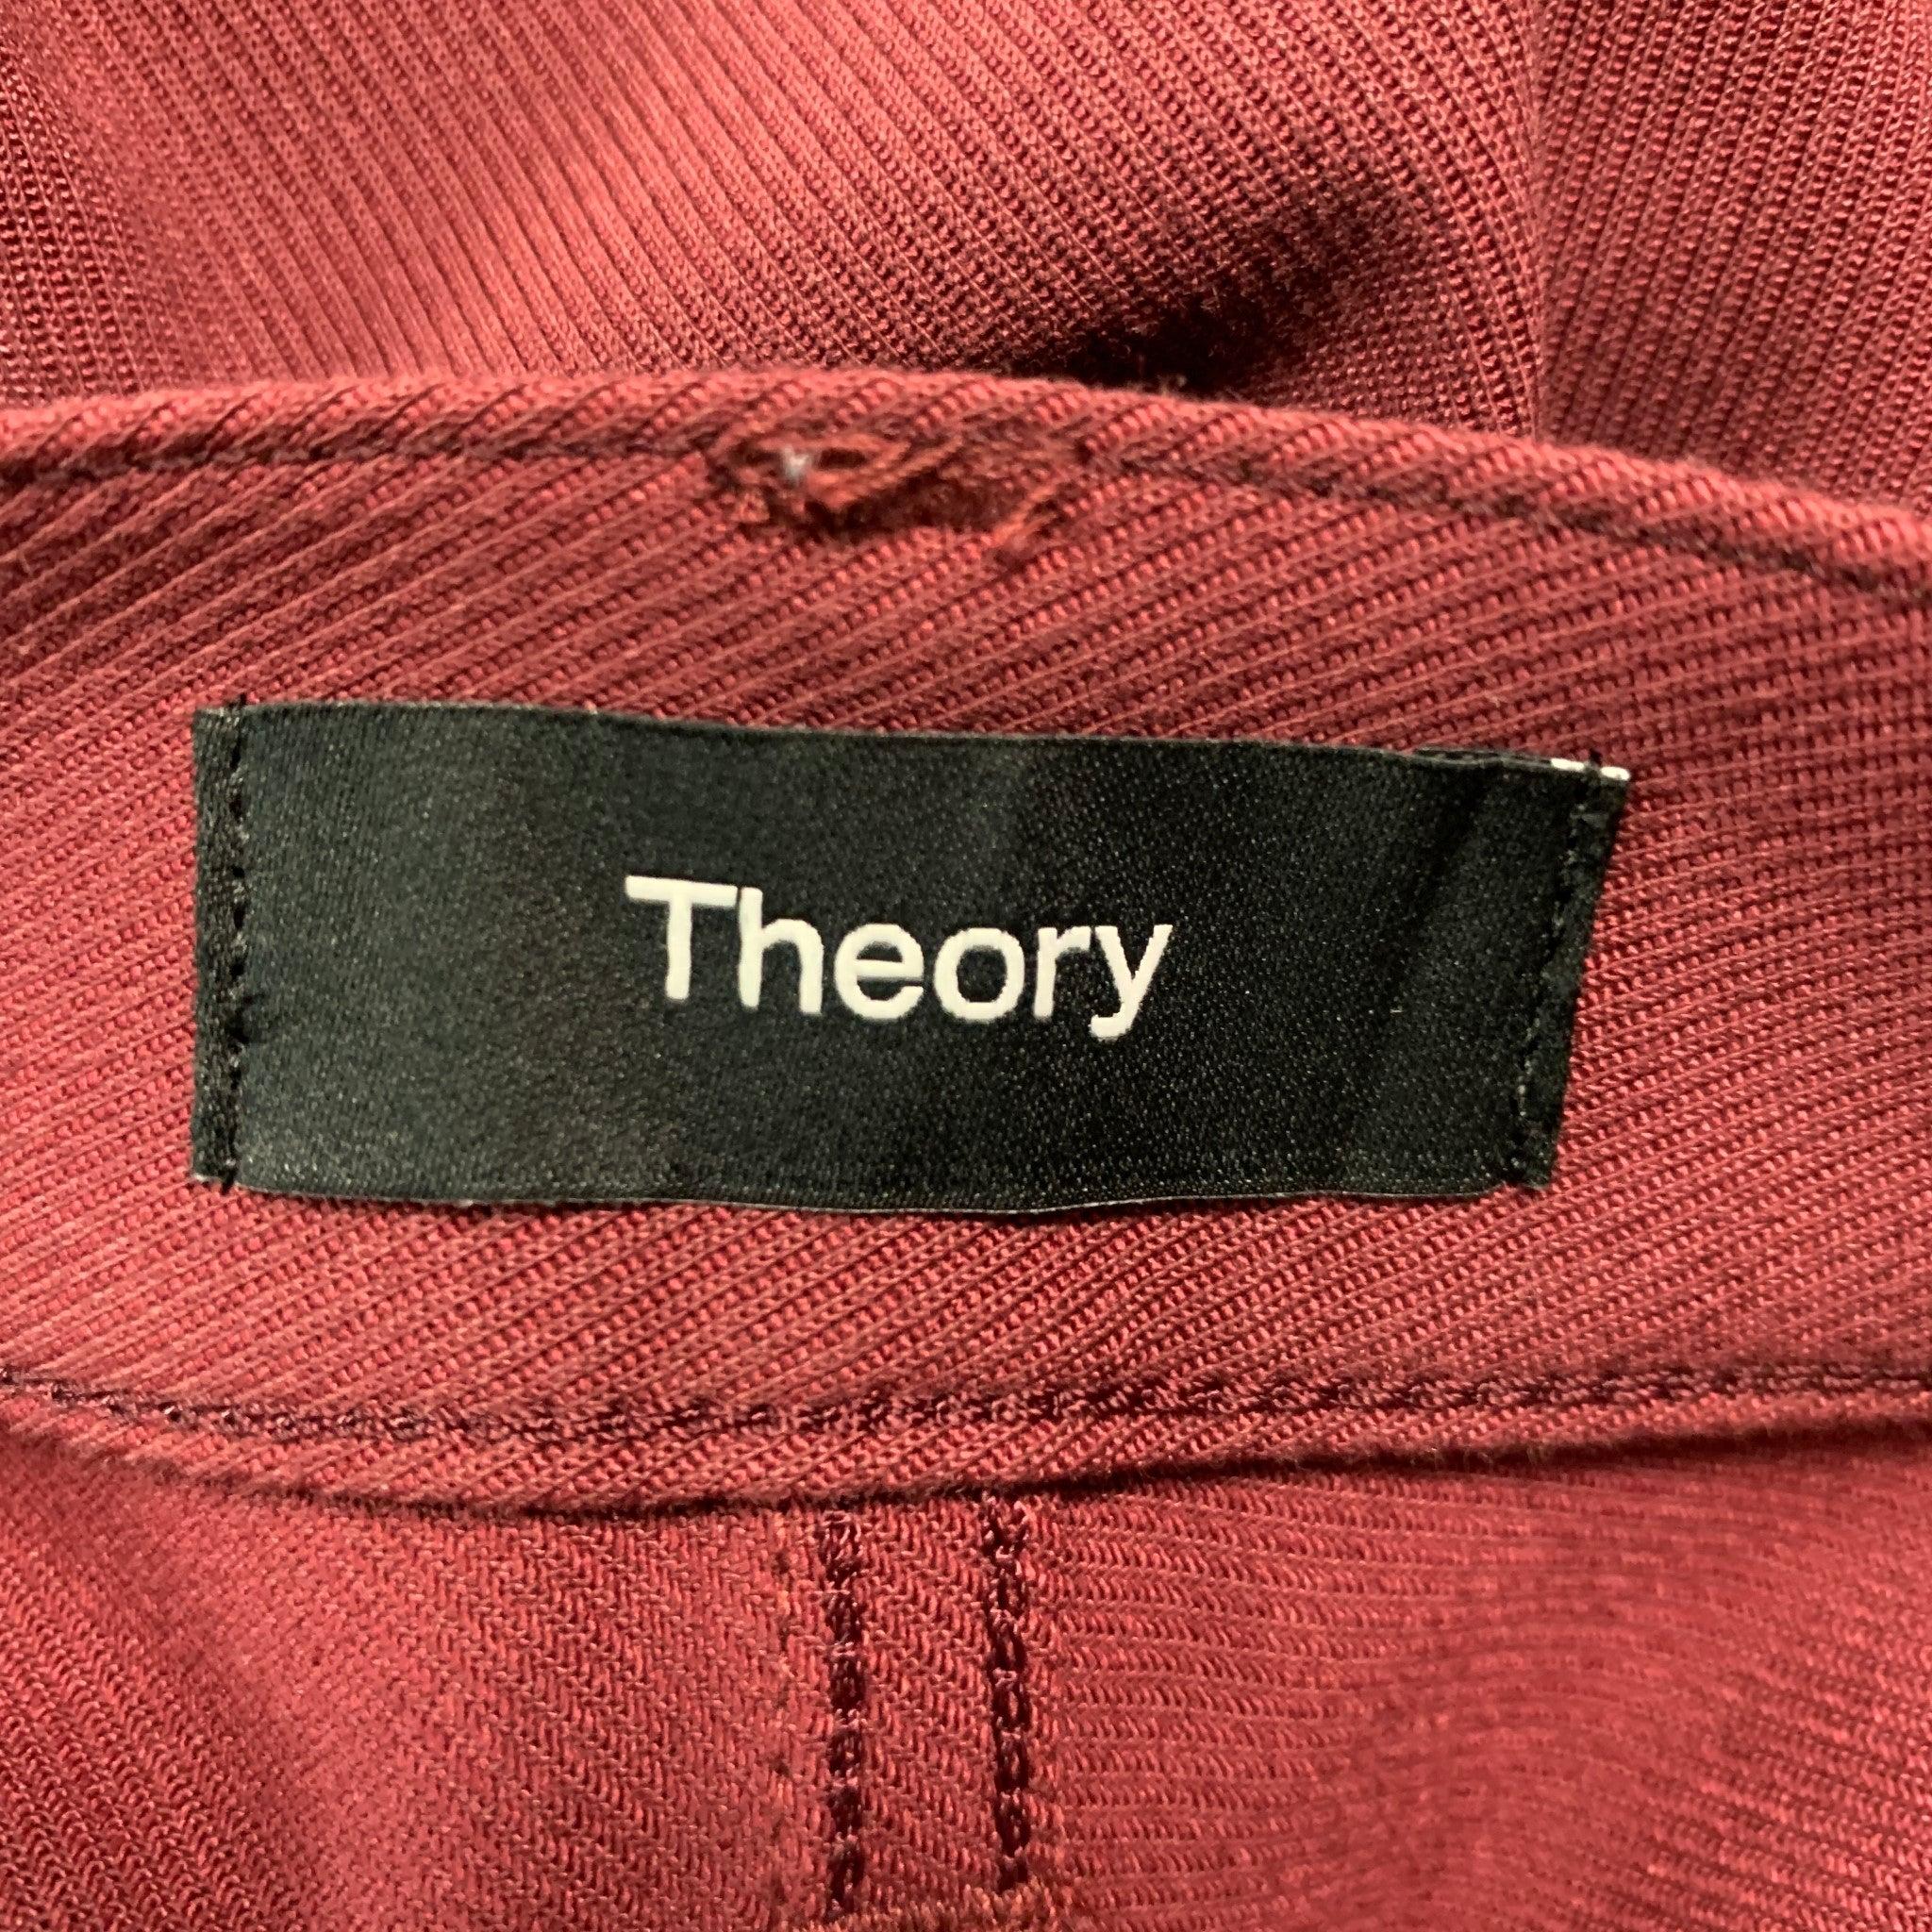 THEORY Size 40 Burgundy Twill Flat Front Casual Pants In Good Condition For Sale In San Francisco, CA